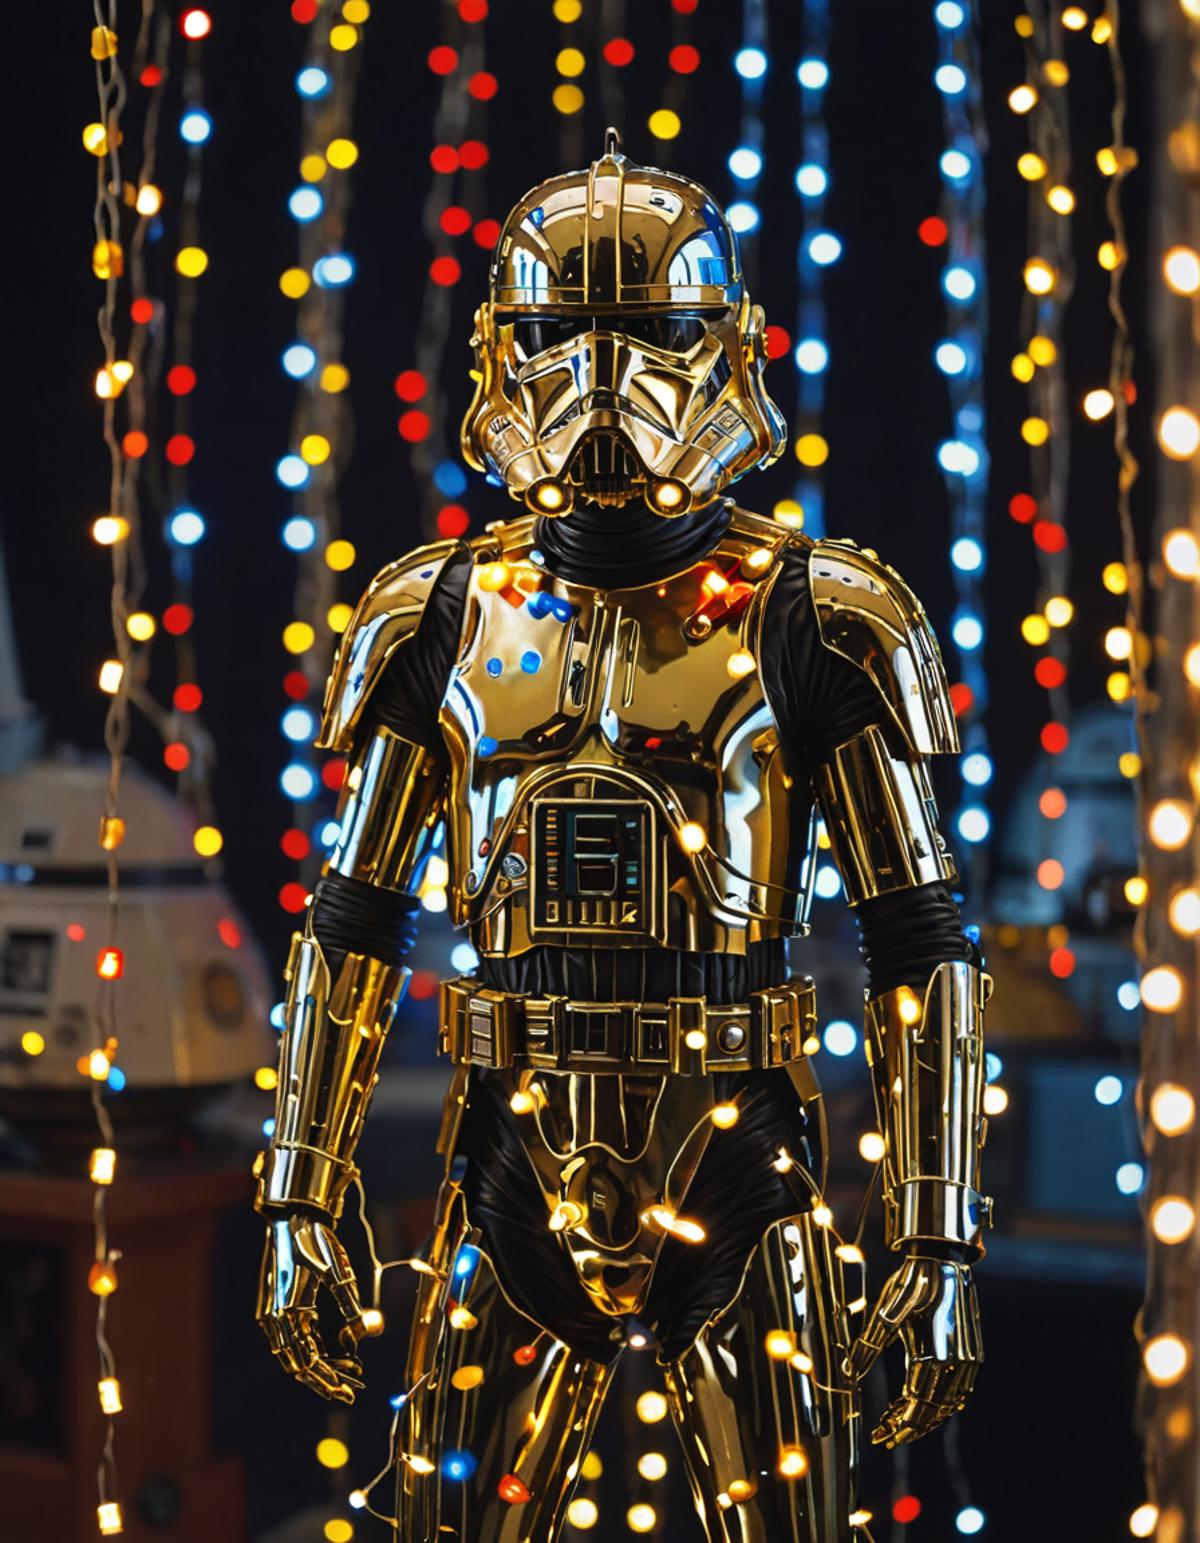 A Gold Stormtrooper Helmet with Lights in Background